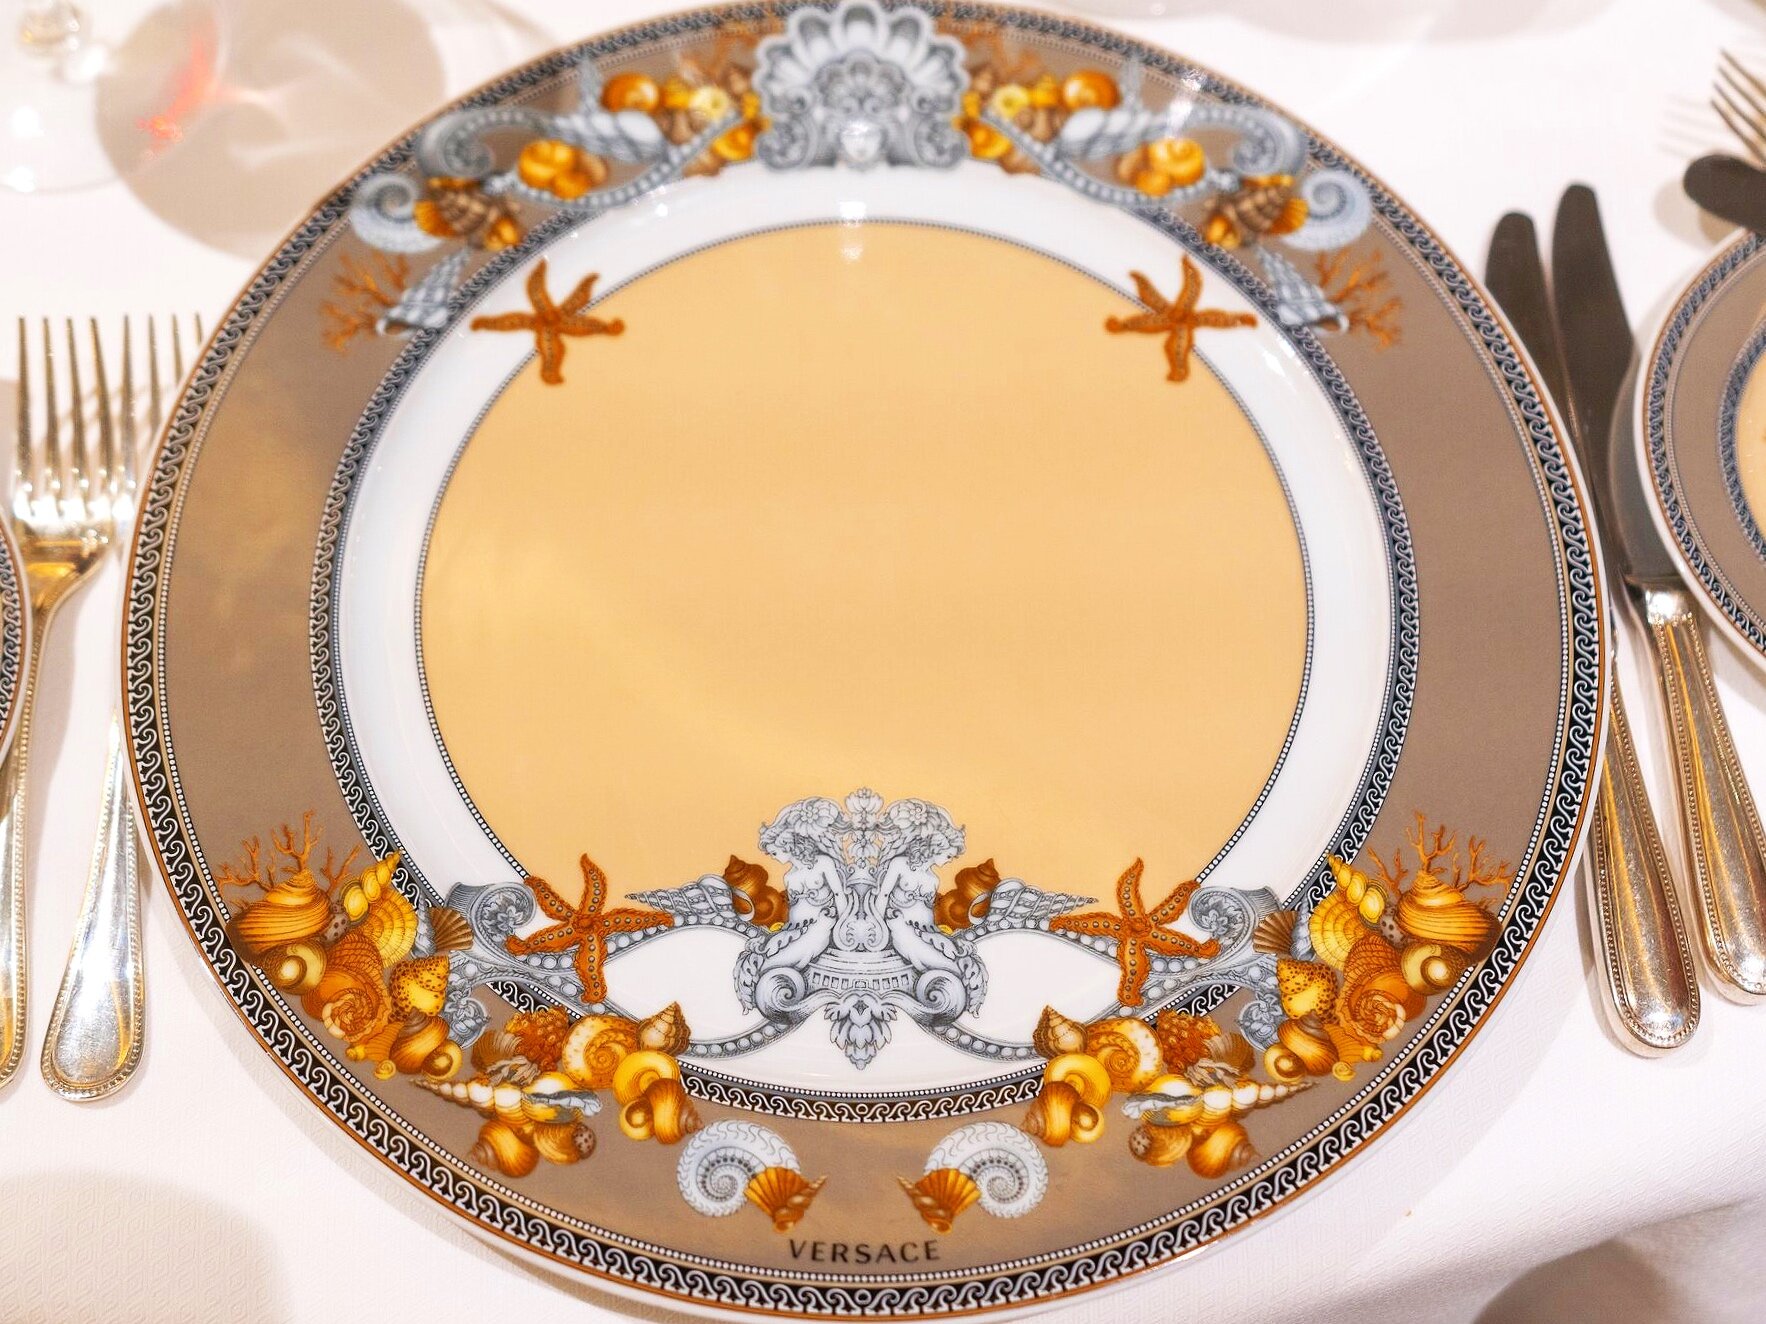  Stunning Versace charger plates, made specially for the Explorer, adorn every setting. 